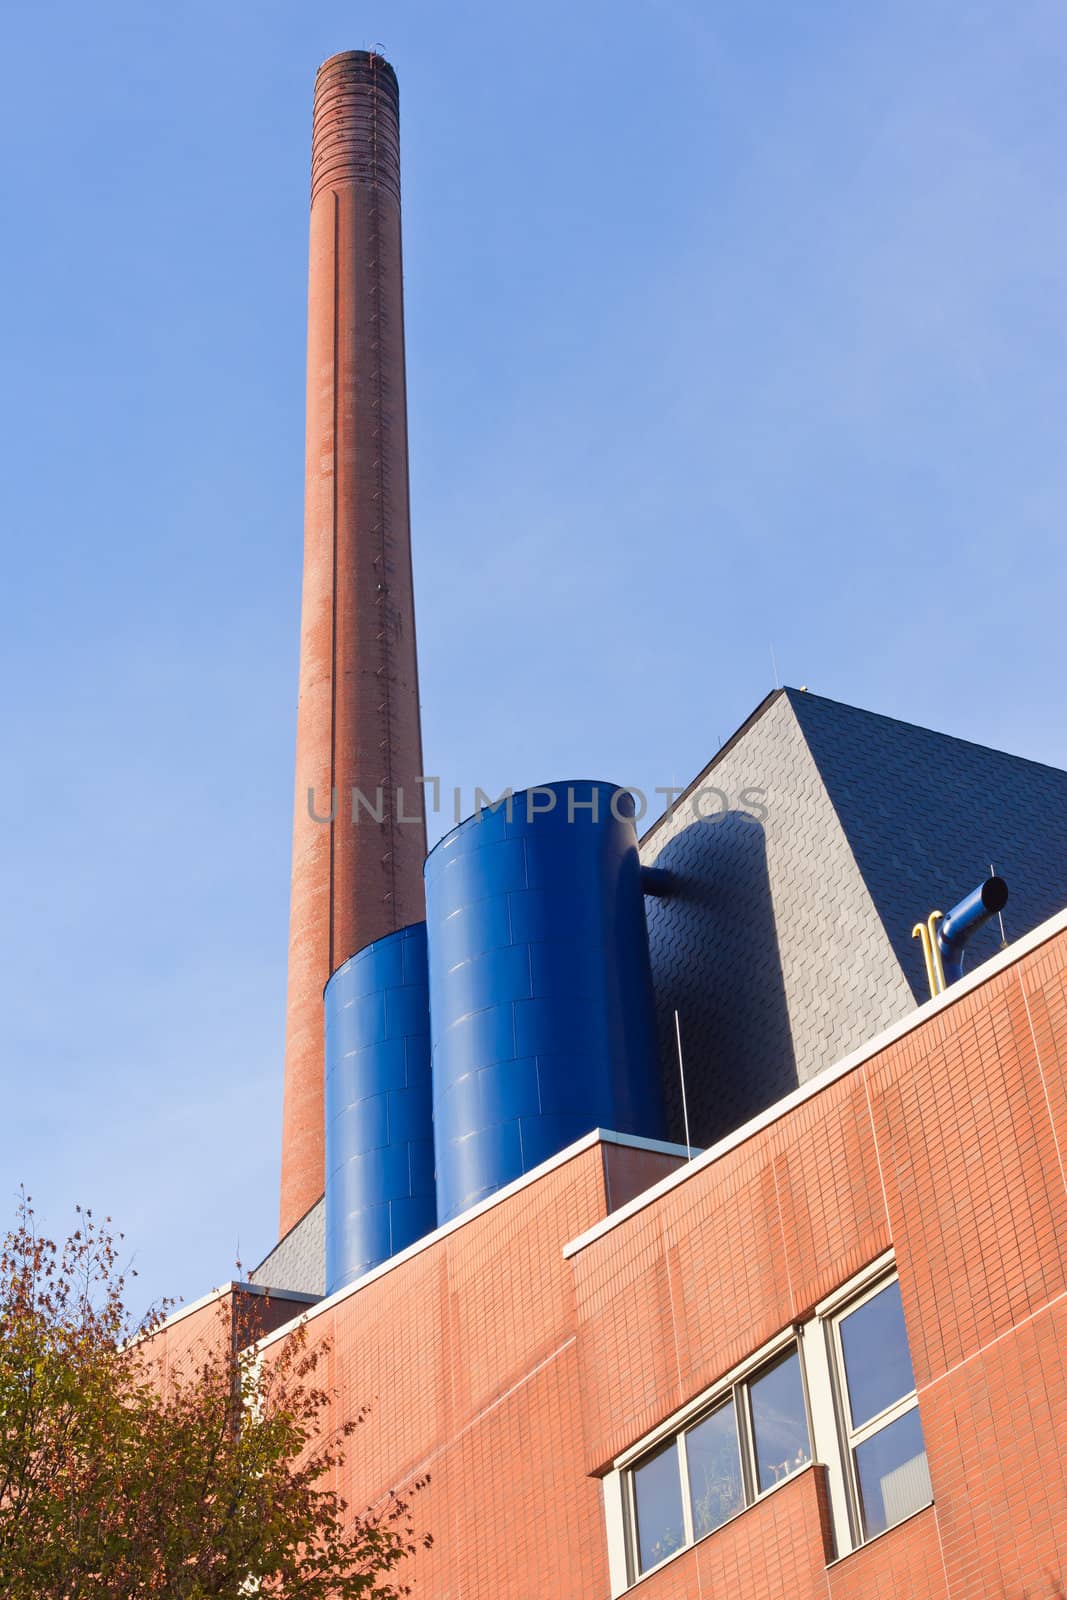 Retro designed industrial brick building with high red brick chimney.